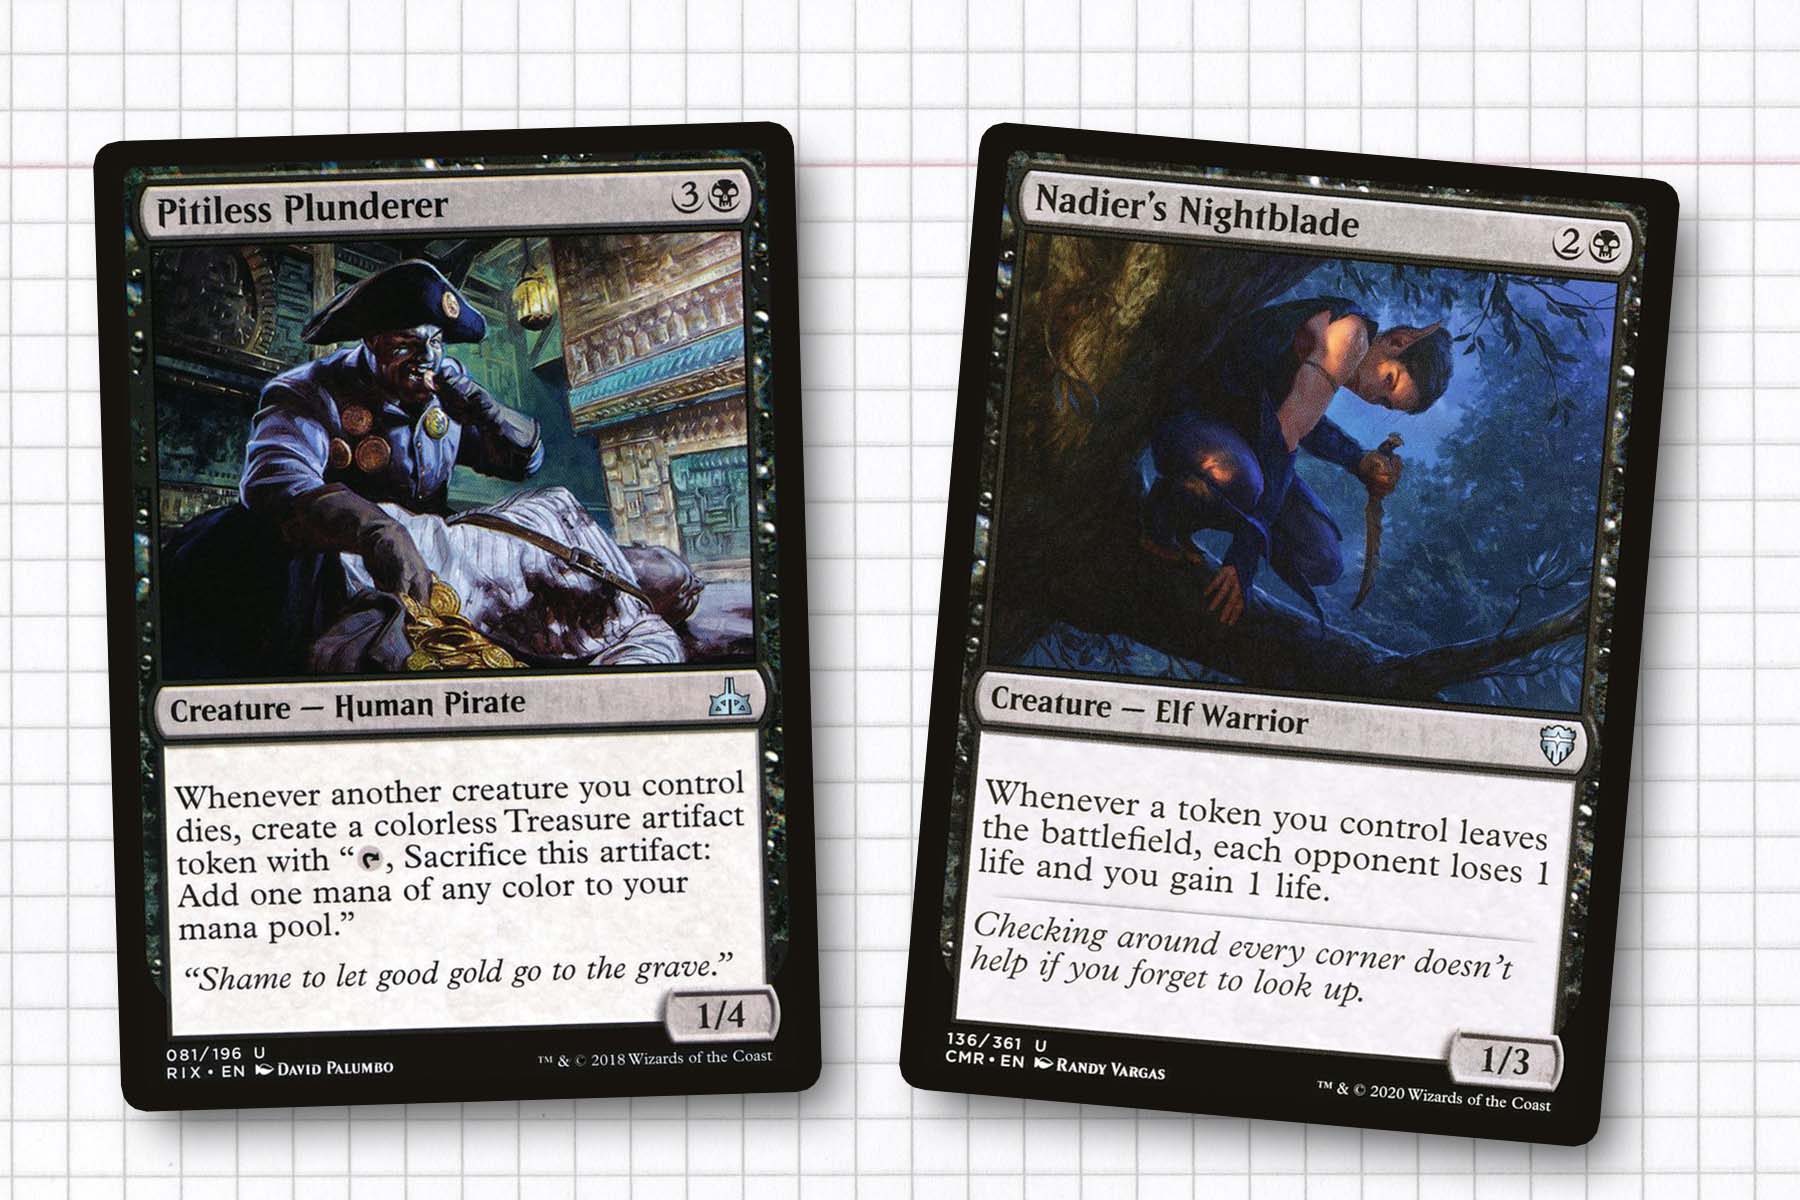 Pitiless Plunderer and Nadier’s Nighblade, two pieces of a token sacrifice engine within the deck